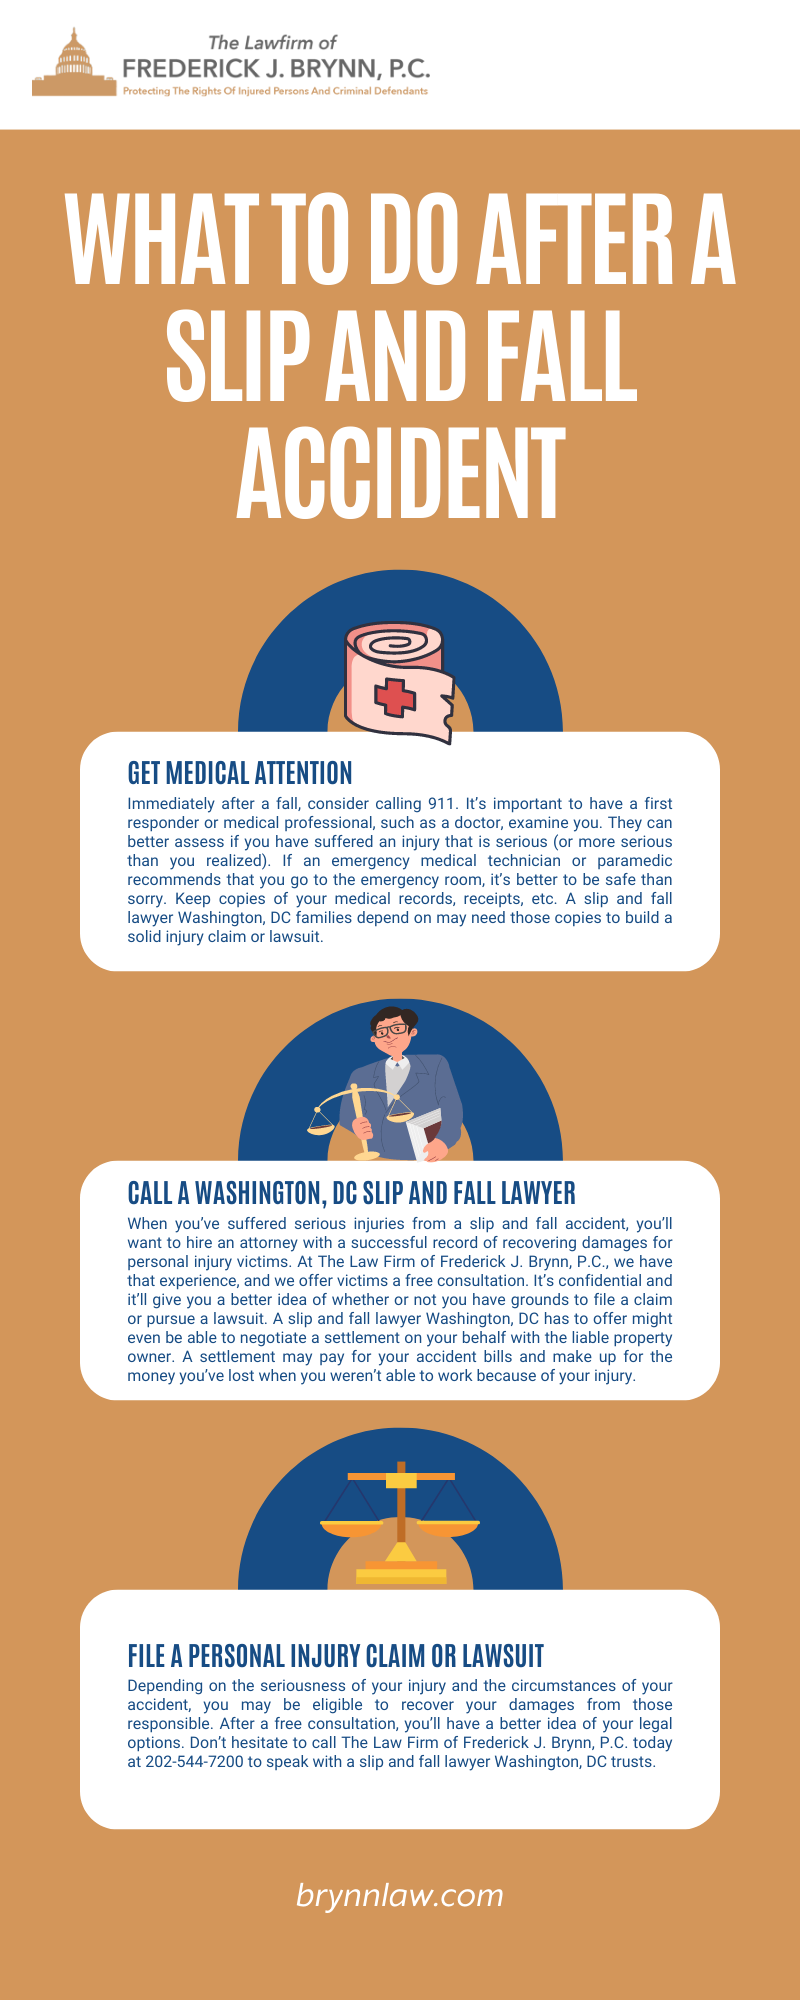 What to Do After a Slip and Fall Accident Infographic